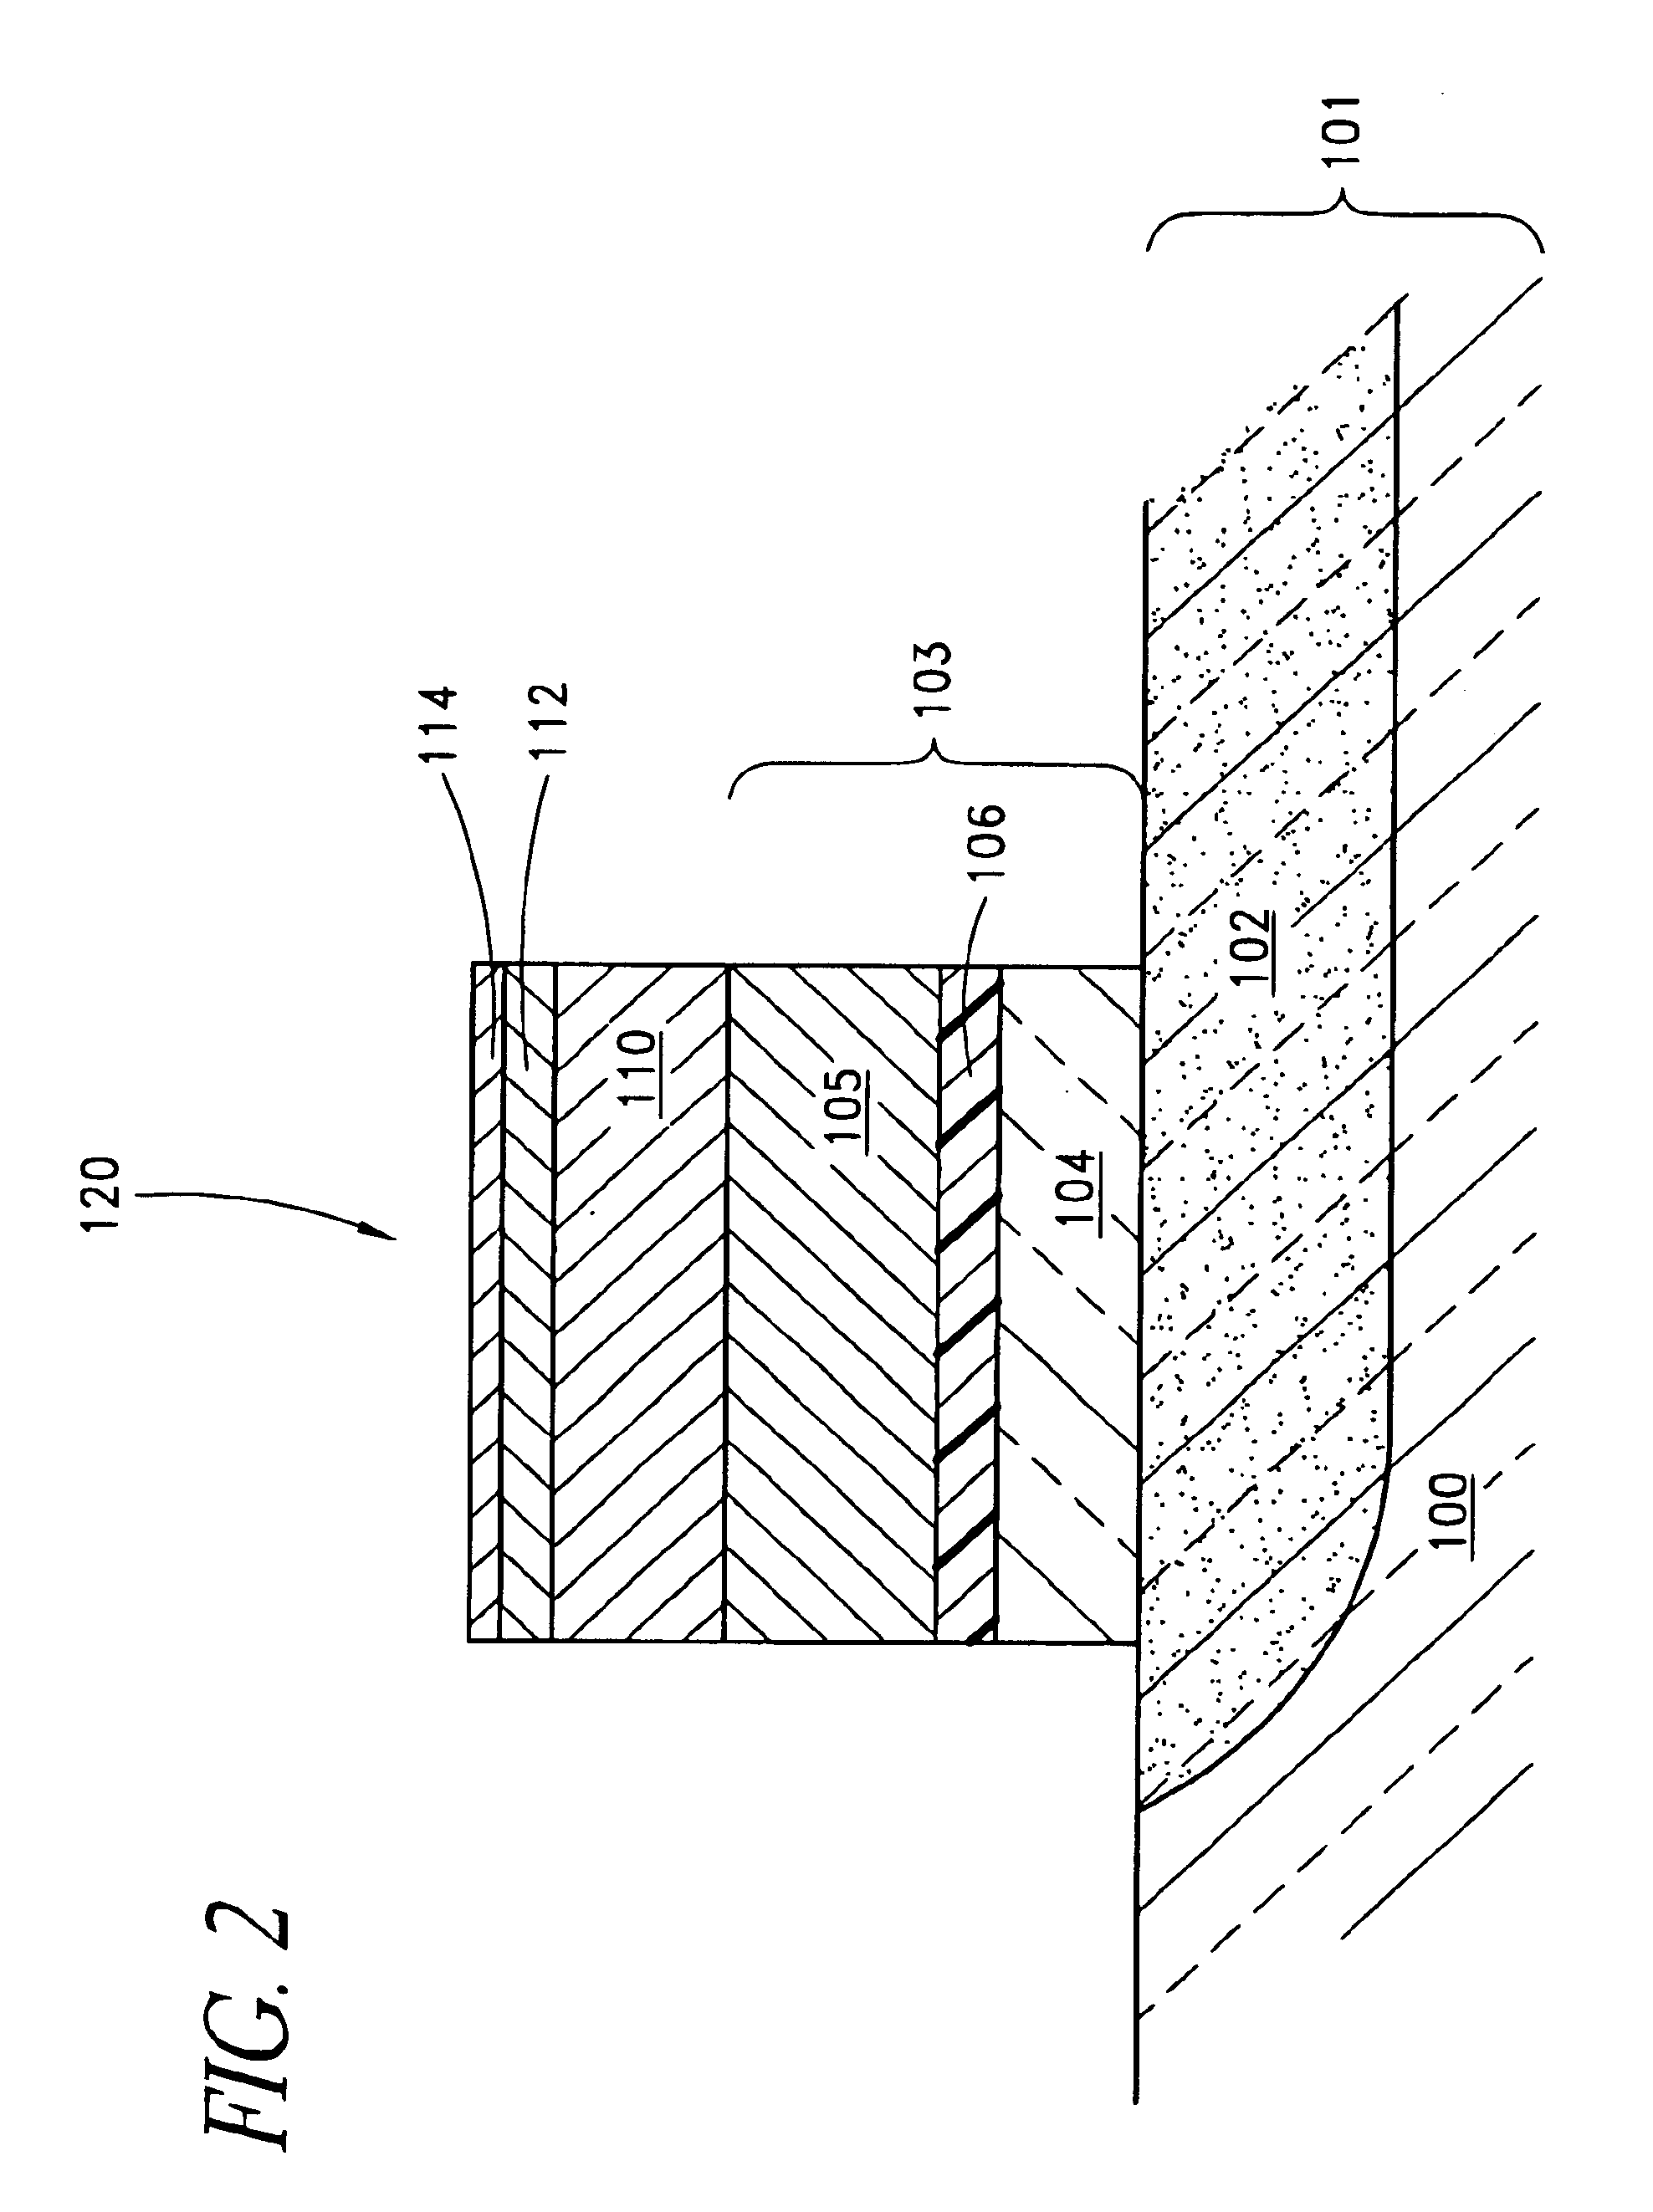 Method of manufacture of programmable switching circuits and memory cells employing a glass layer